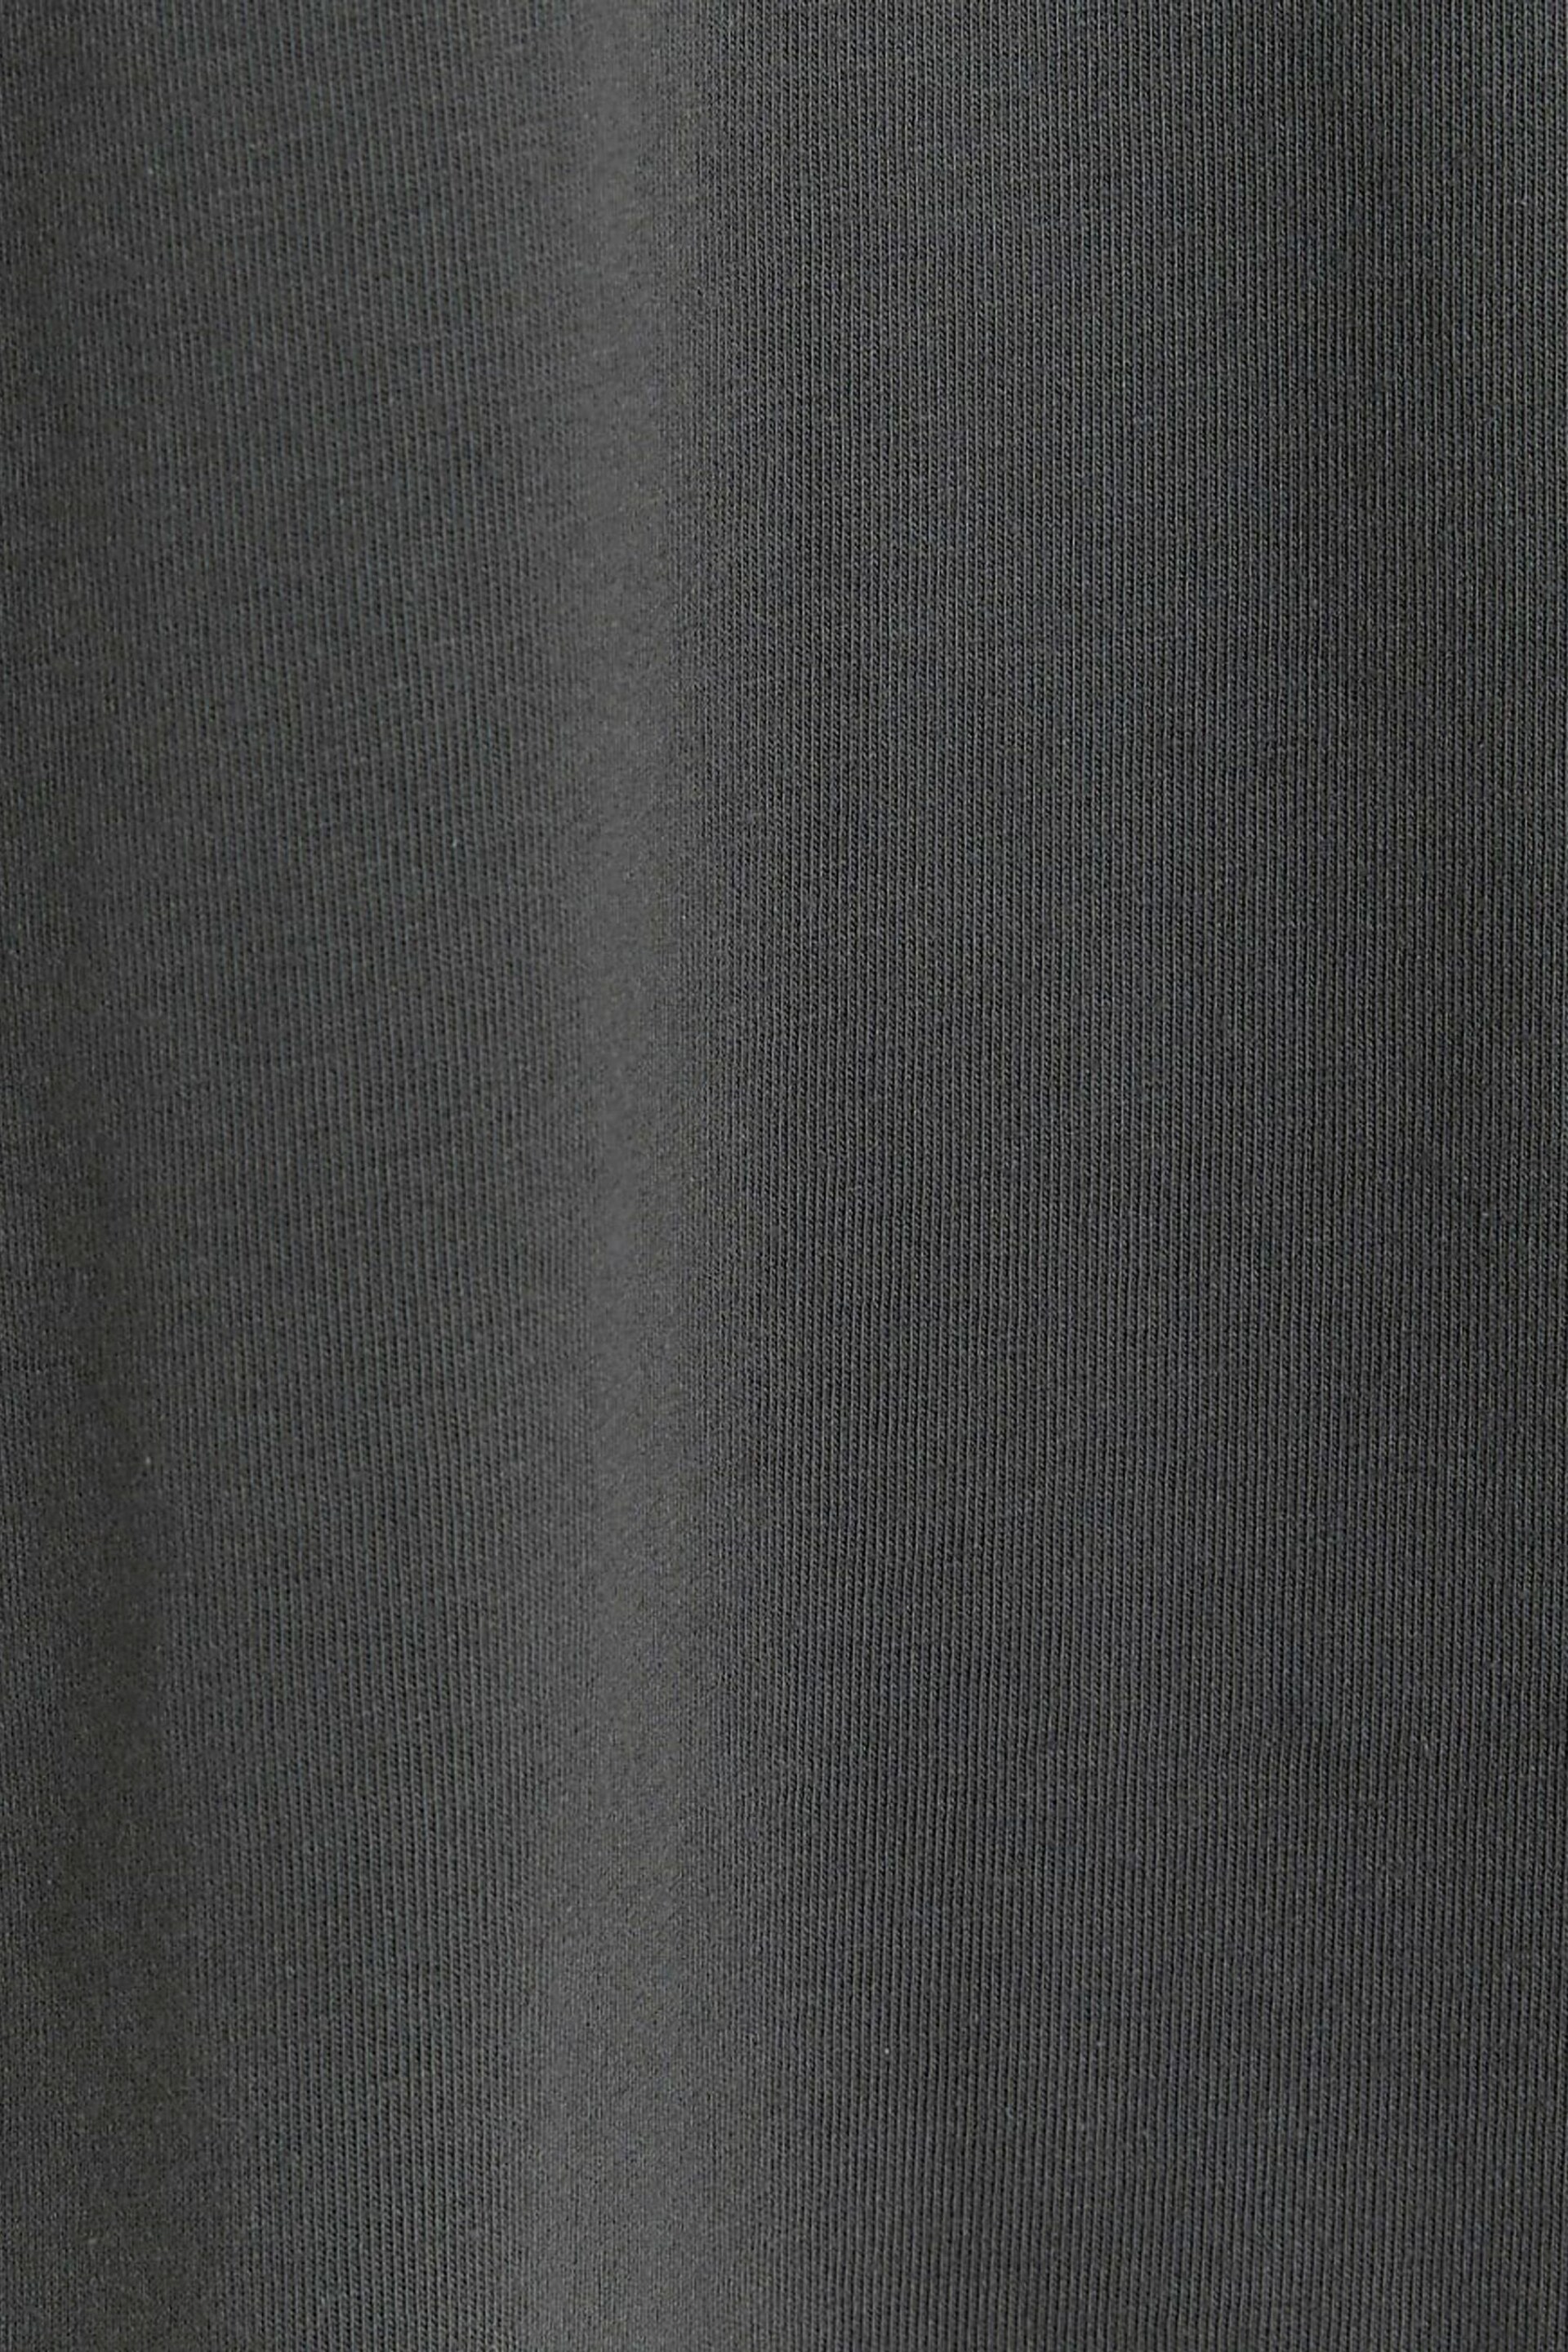 River Island Grey Muscle Fit T-Shirt - Image 6 of 6